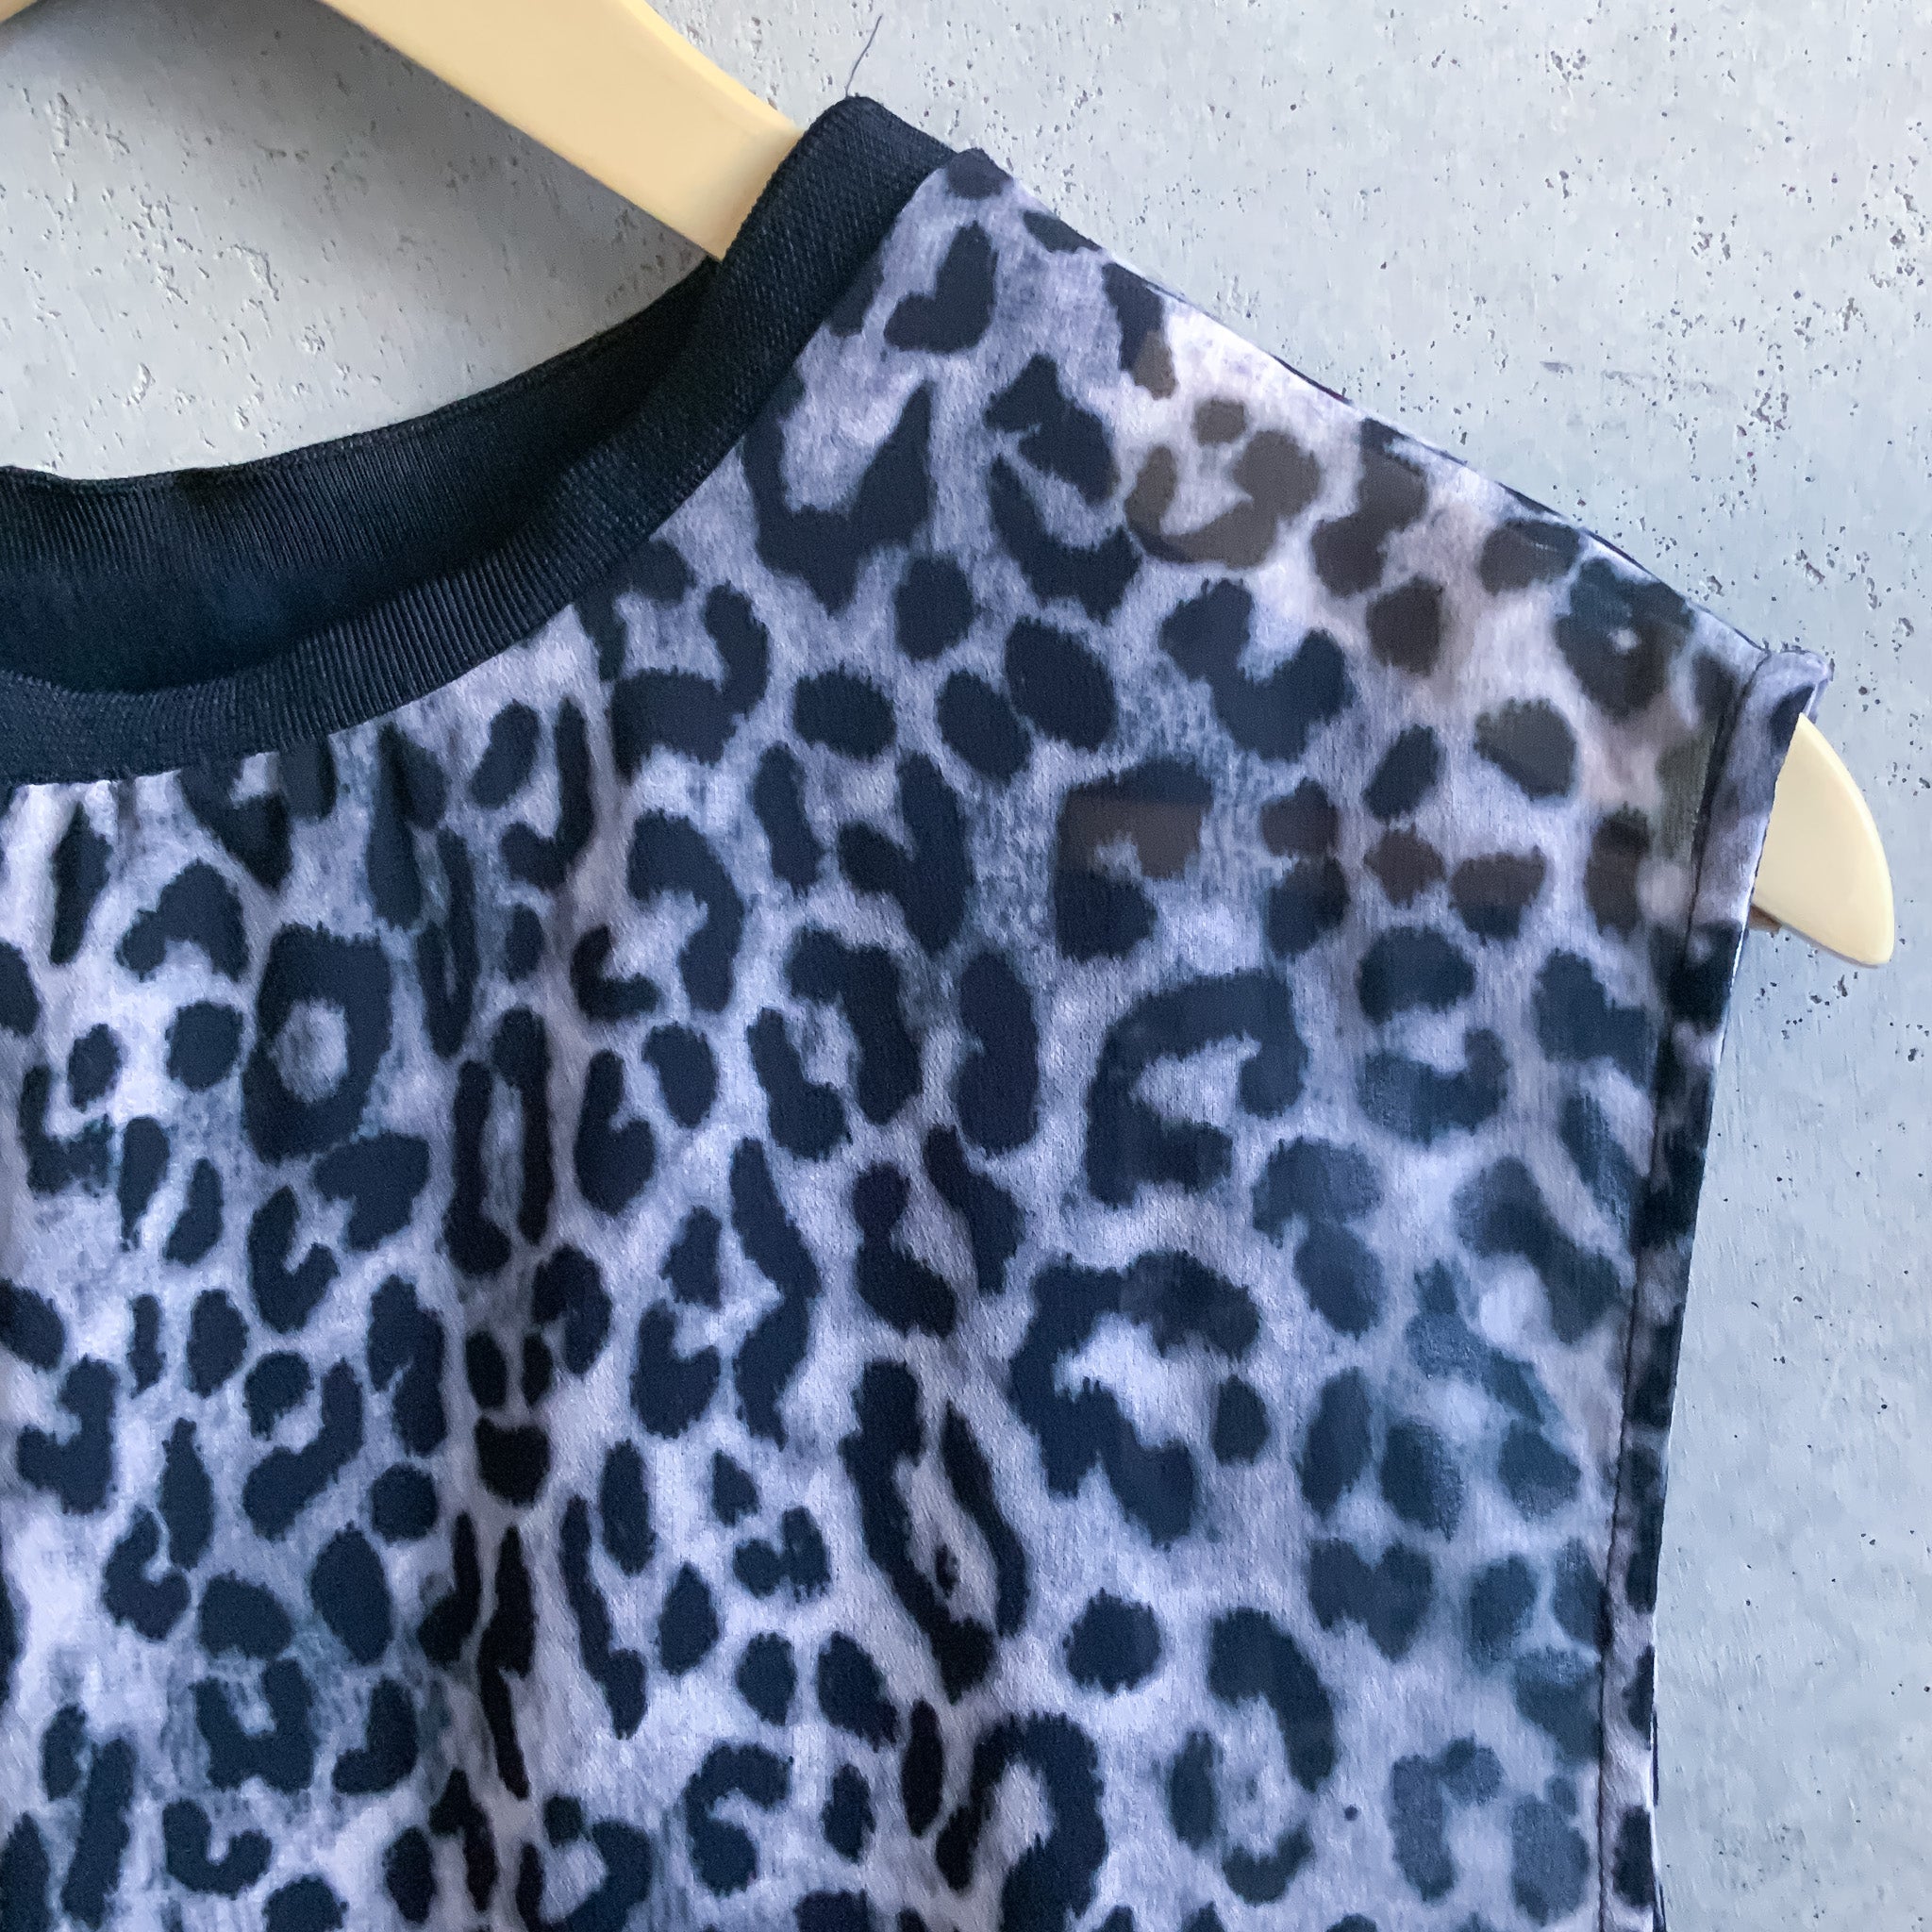 FOREVER NEW Black and Grey Leopard Print Muscle Top - Size 10